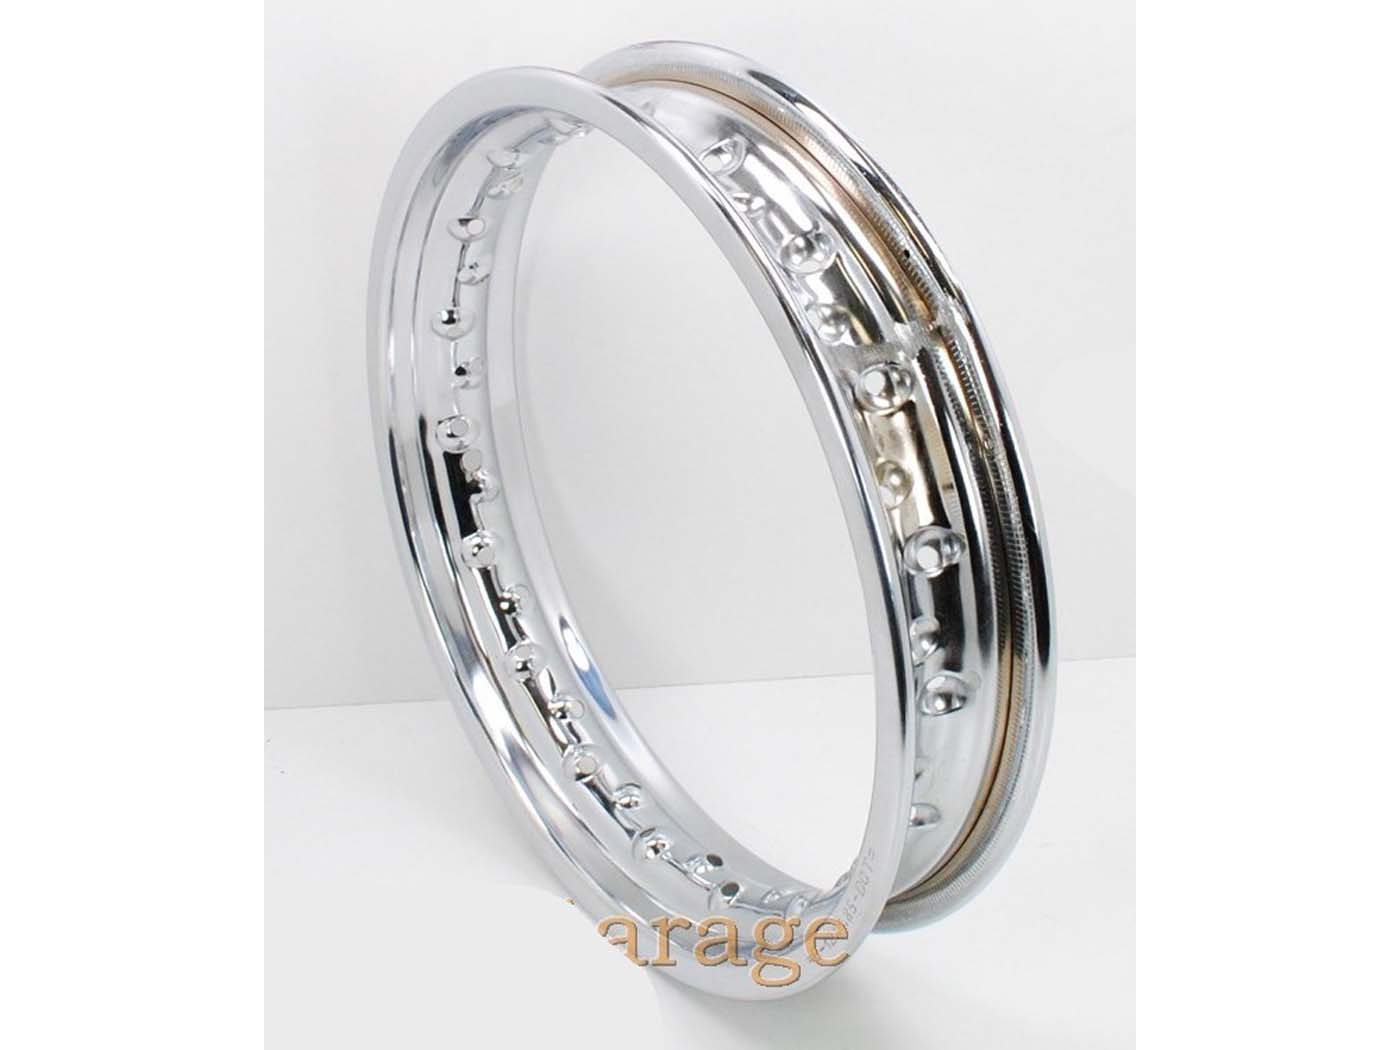 Front Wheel / Rear Wheel Chrome Rim 1.85 X 12 Inch For Puch DS 50 Moped Mokick